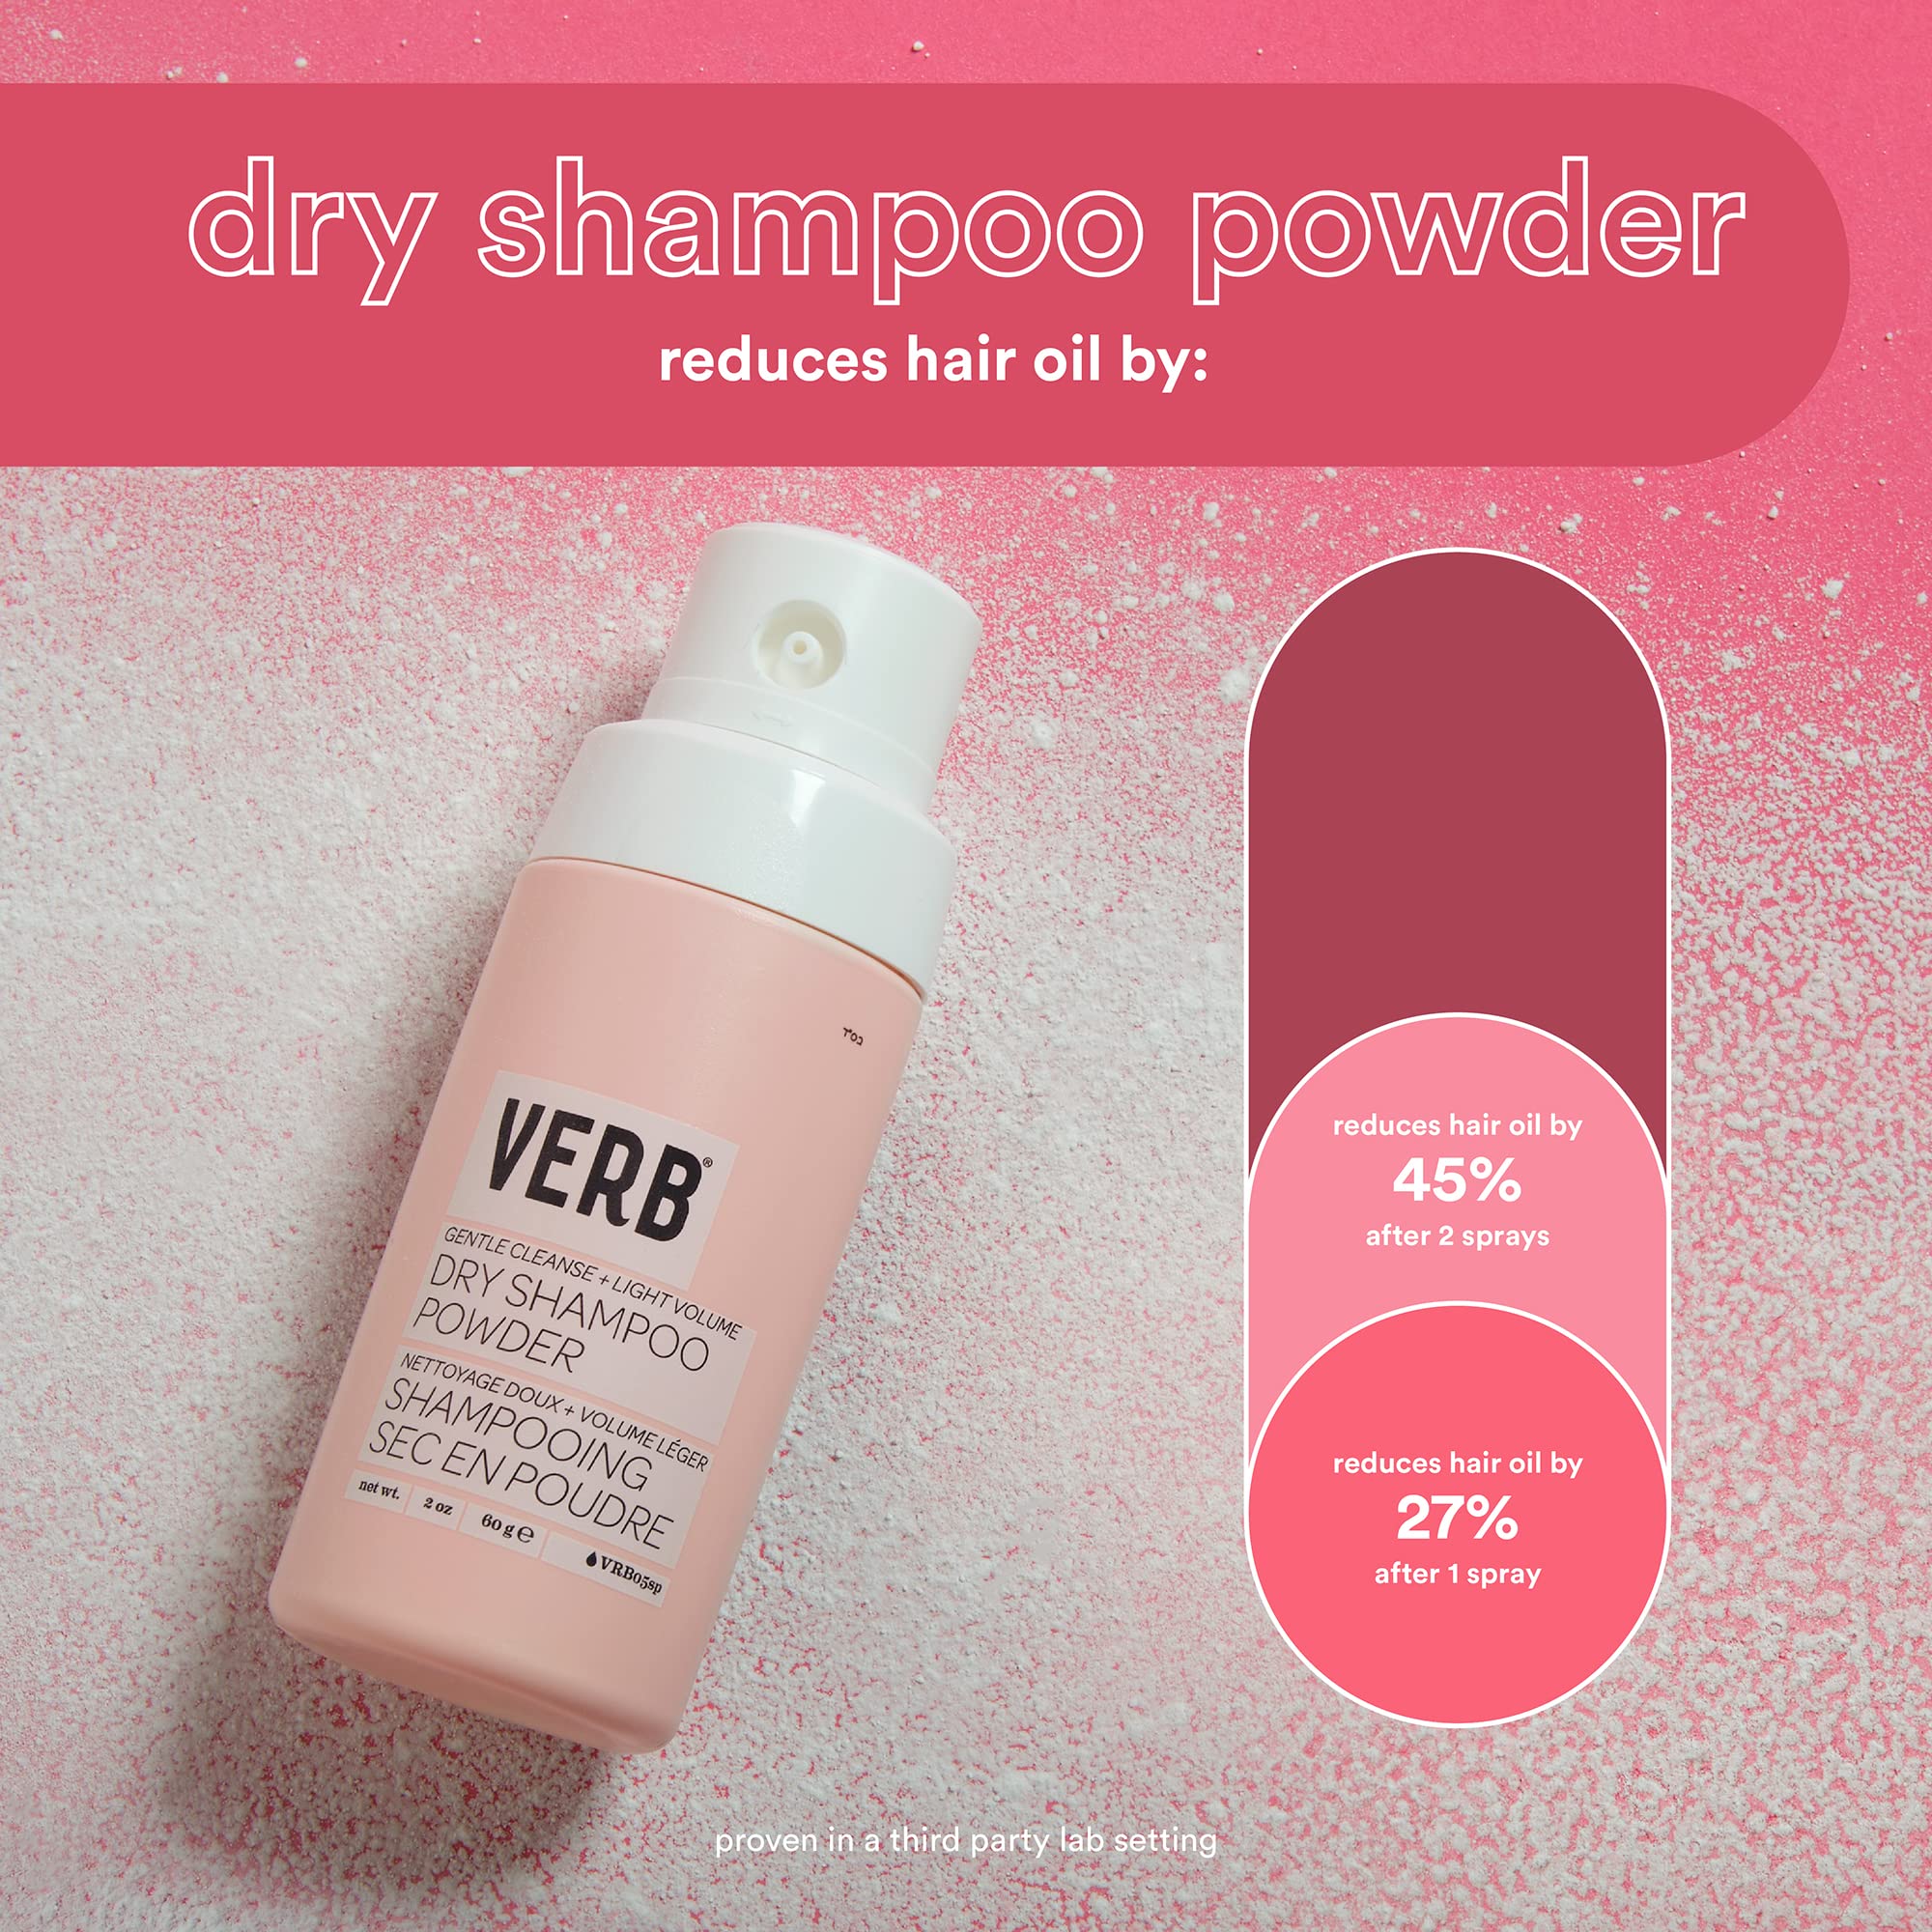 Verb Dry Shampoo Powder – Vegan translucent Powder Refreshes Hair, Removes Excess Oil and Adds Volume - Paraben Free, Gluten Free, With No Harmful Sulfates, 2 oz